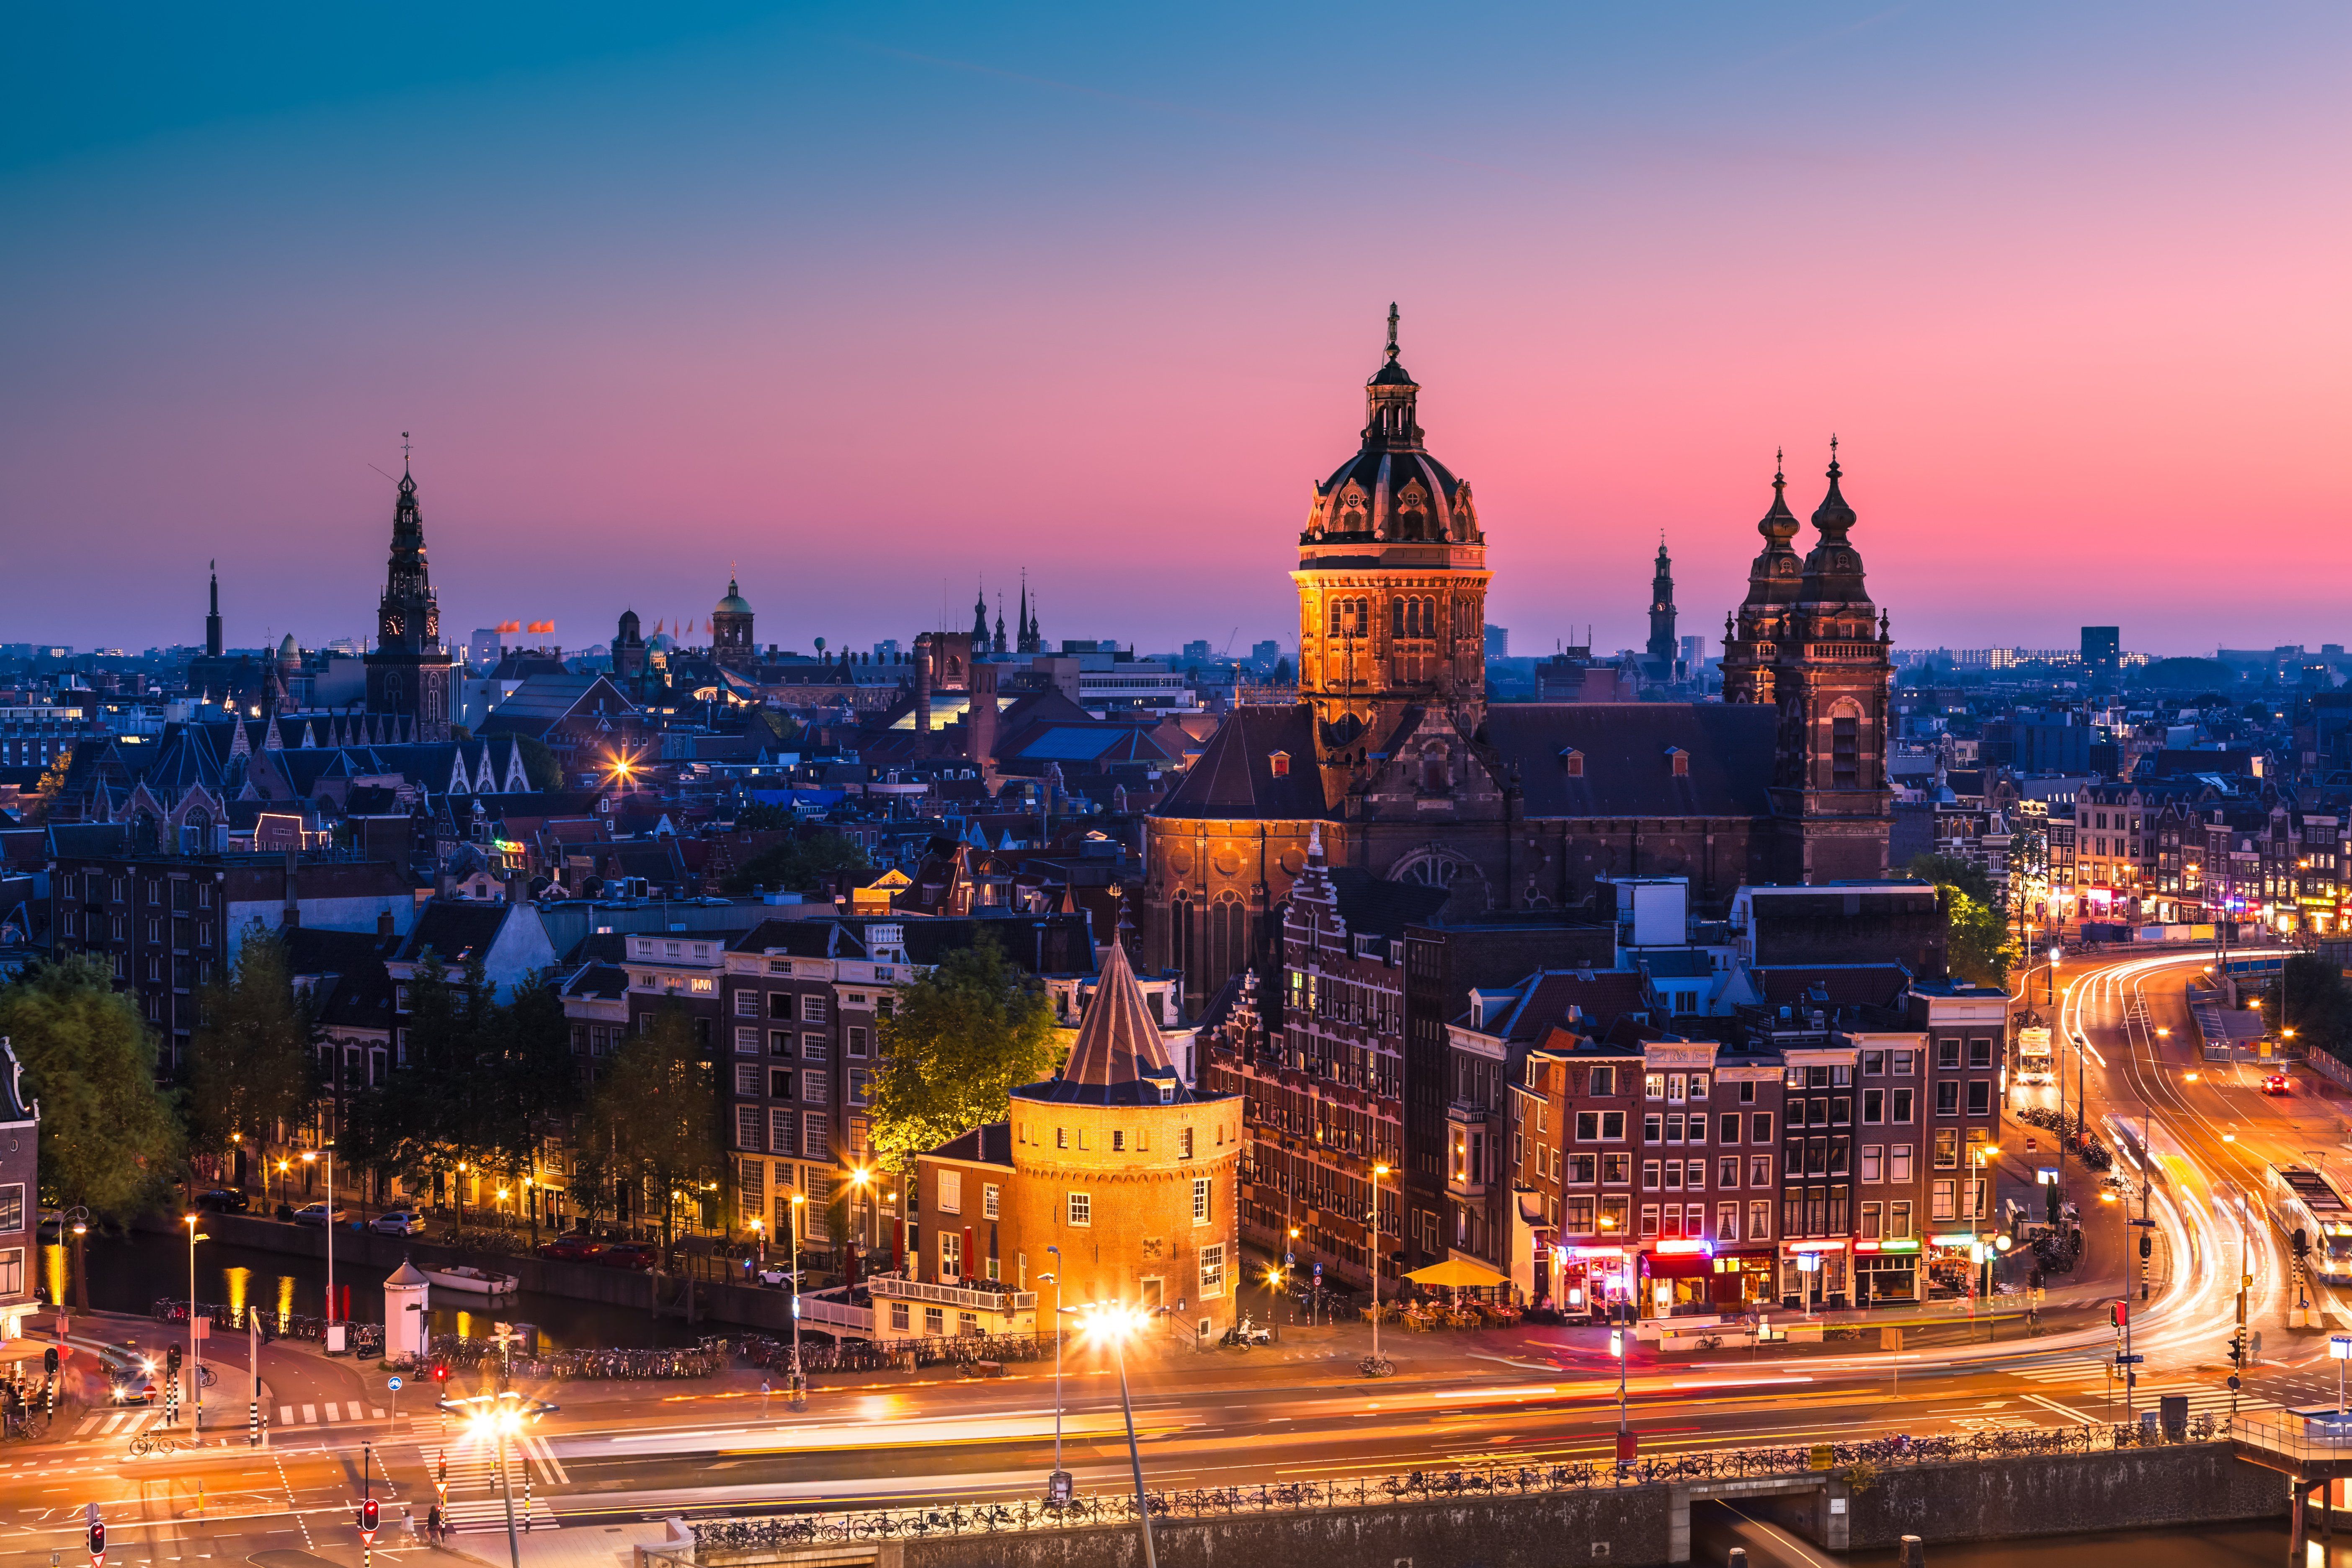 amsterdam, Nederland, Amsterdam, Netherlands, City, Night, Sunset, Home, Church, Cathedral, Buildings, Roofs, Roads, Cars, Street, Lights, Exposure Wallpaper HD / Desktop and Mobile Background